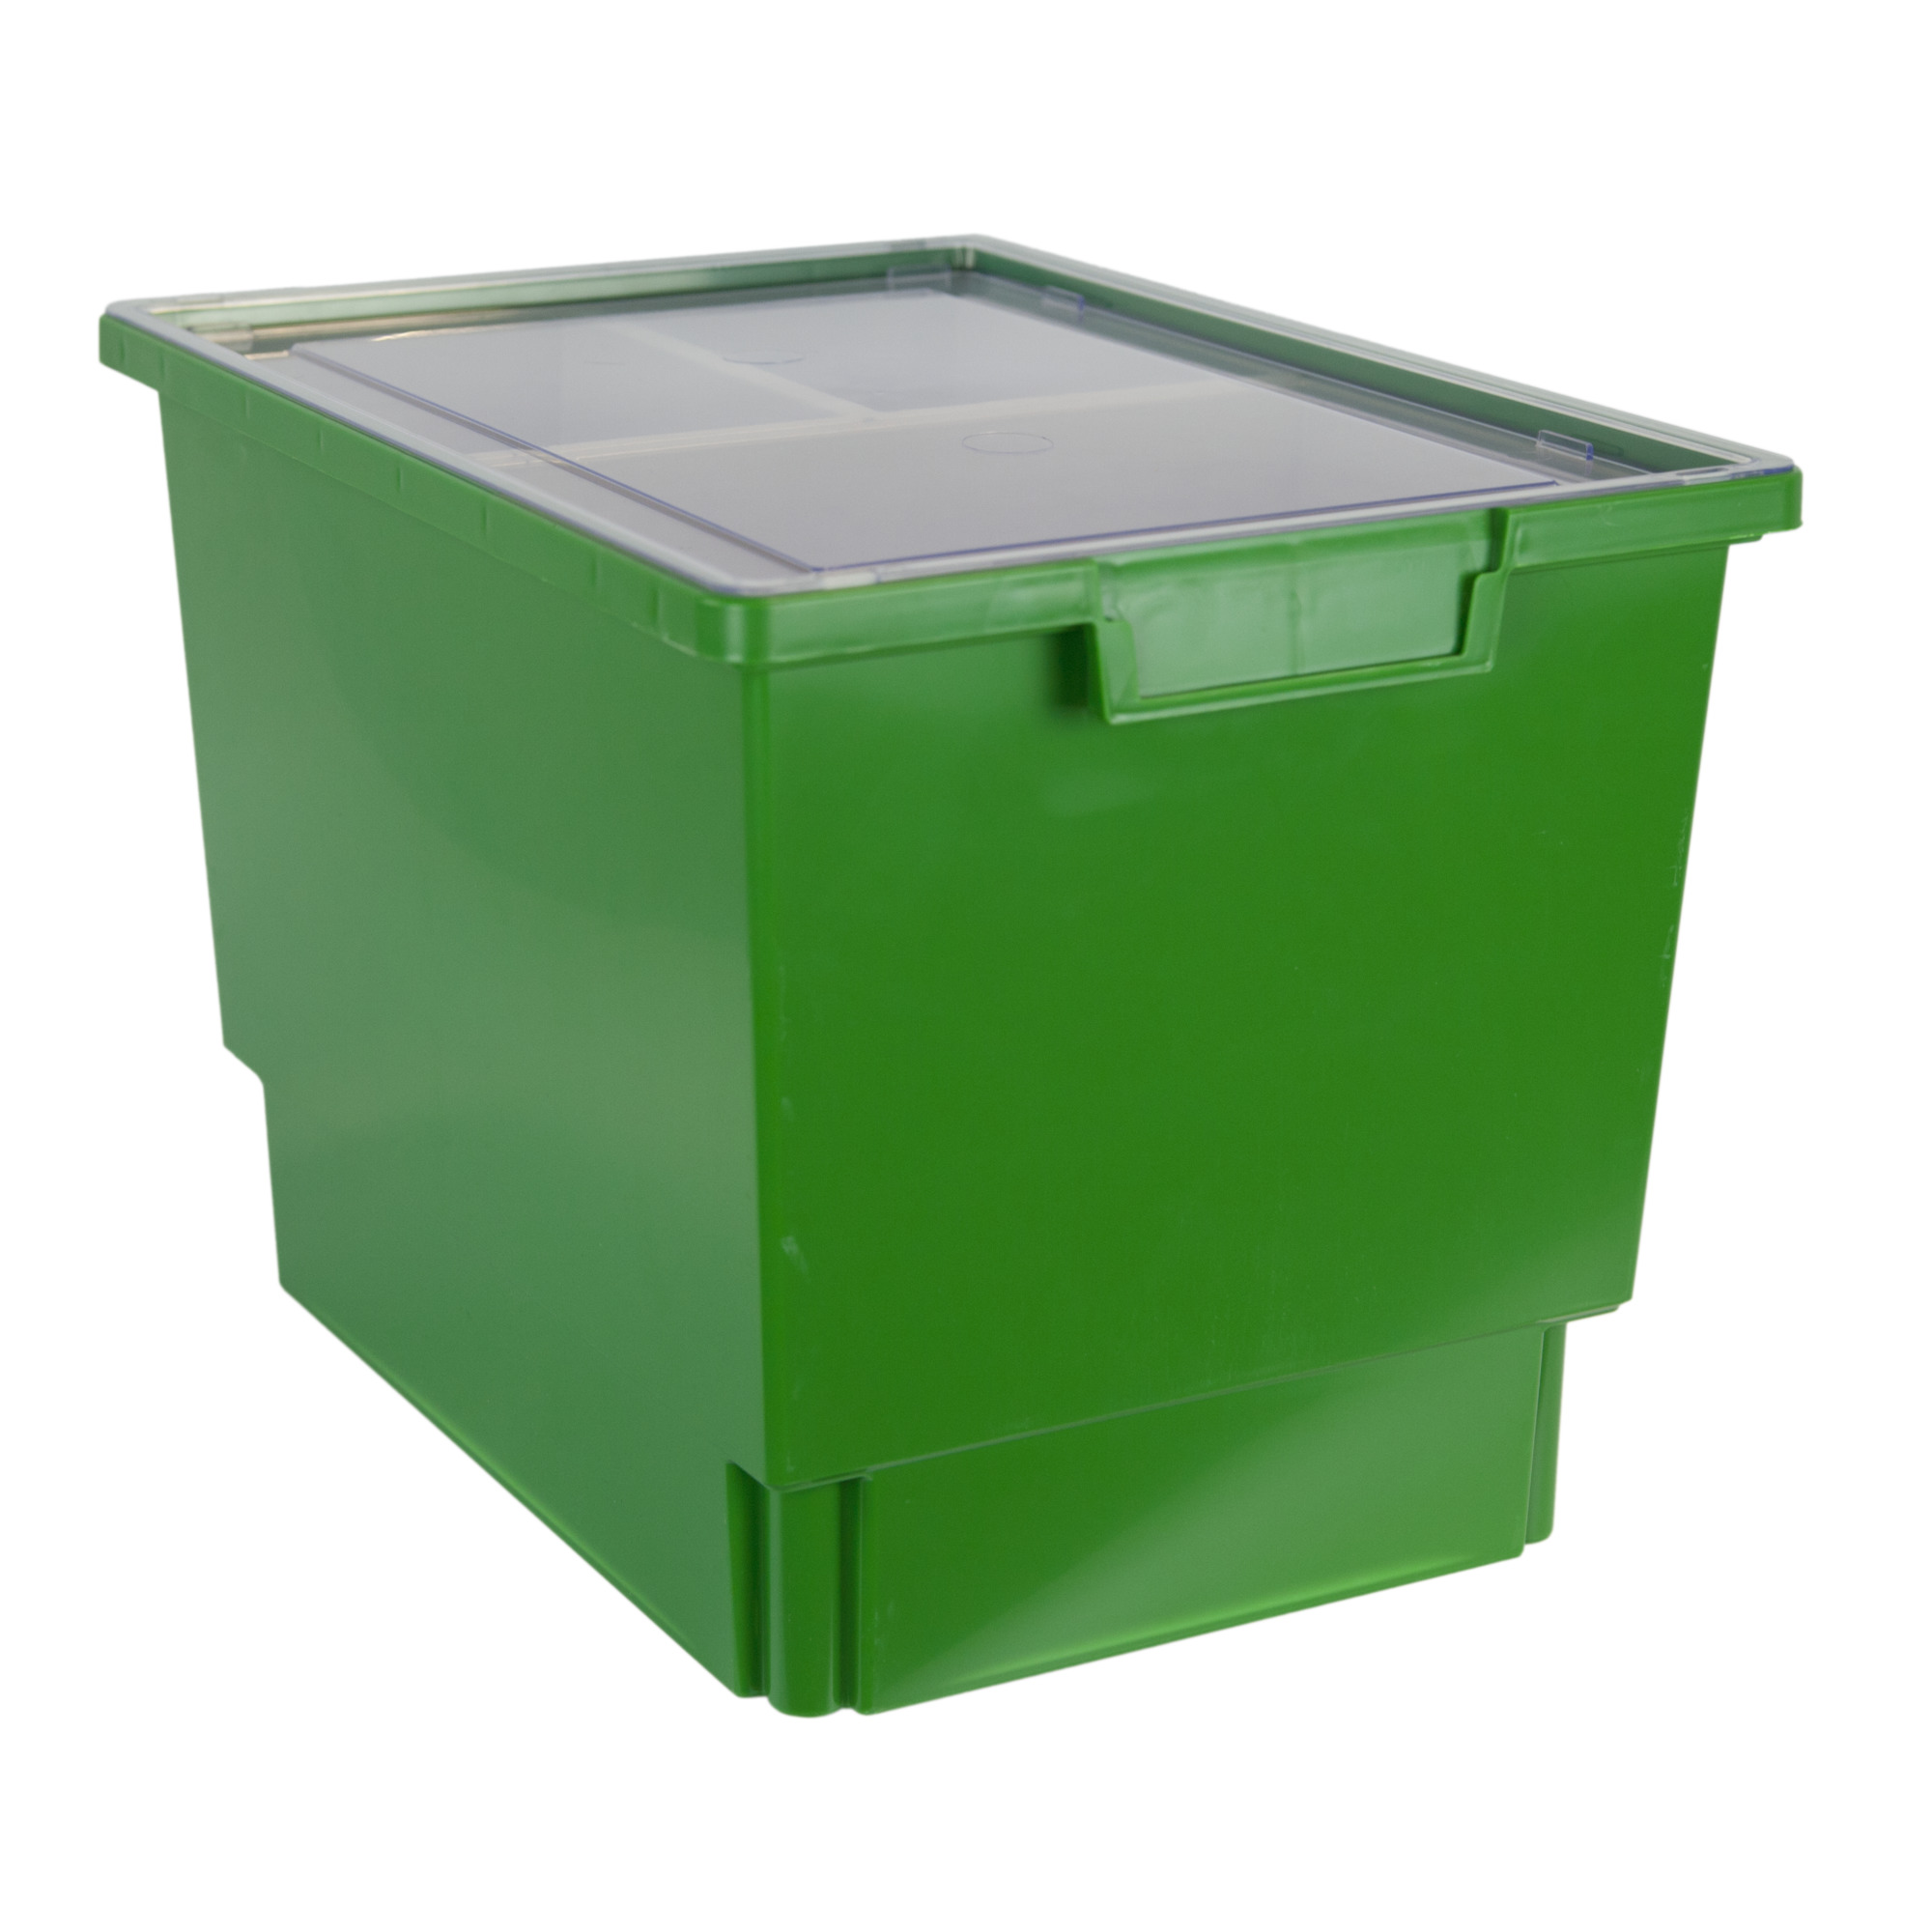 Certwood StorWerks, Slim Line 12Inch Tray Kit (3 x Divisions) Green-3PK, Included (qty.) 3, Material Plastic, Height 12 in, Model CE1954PG-NK0004-3